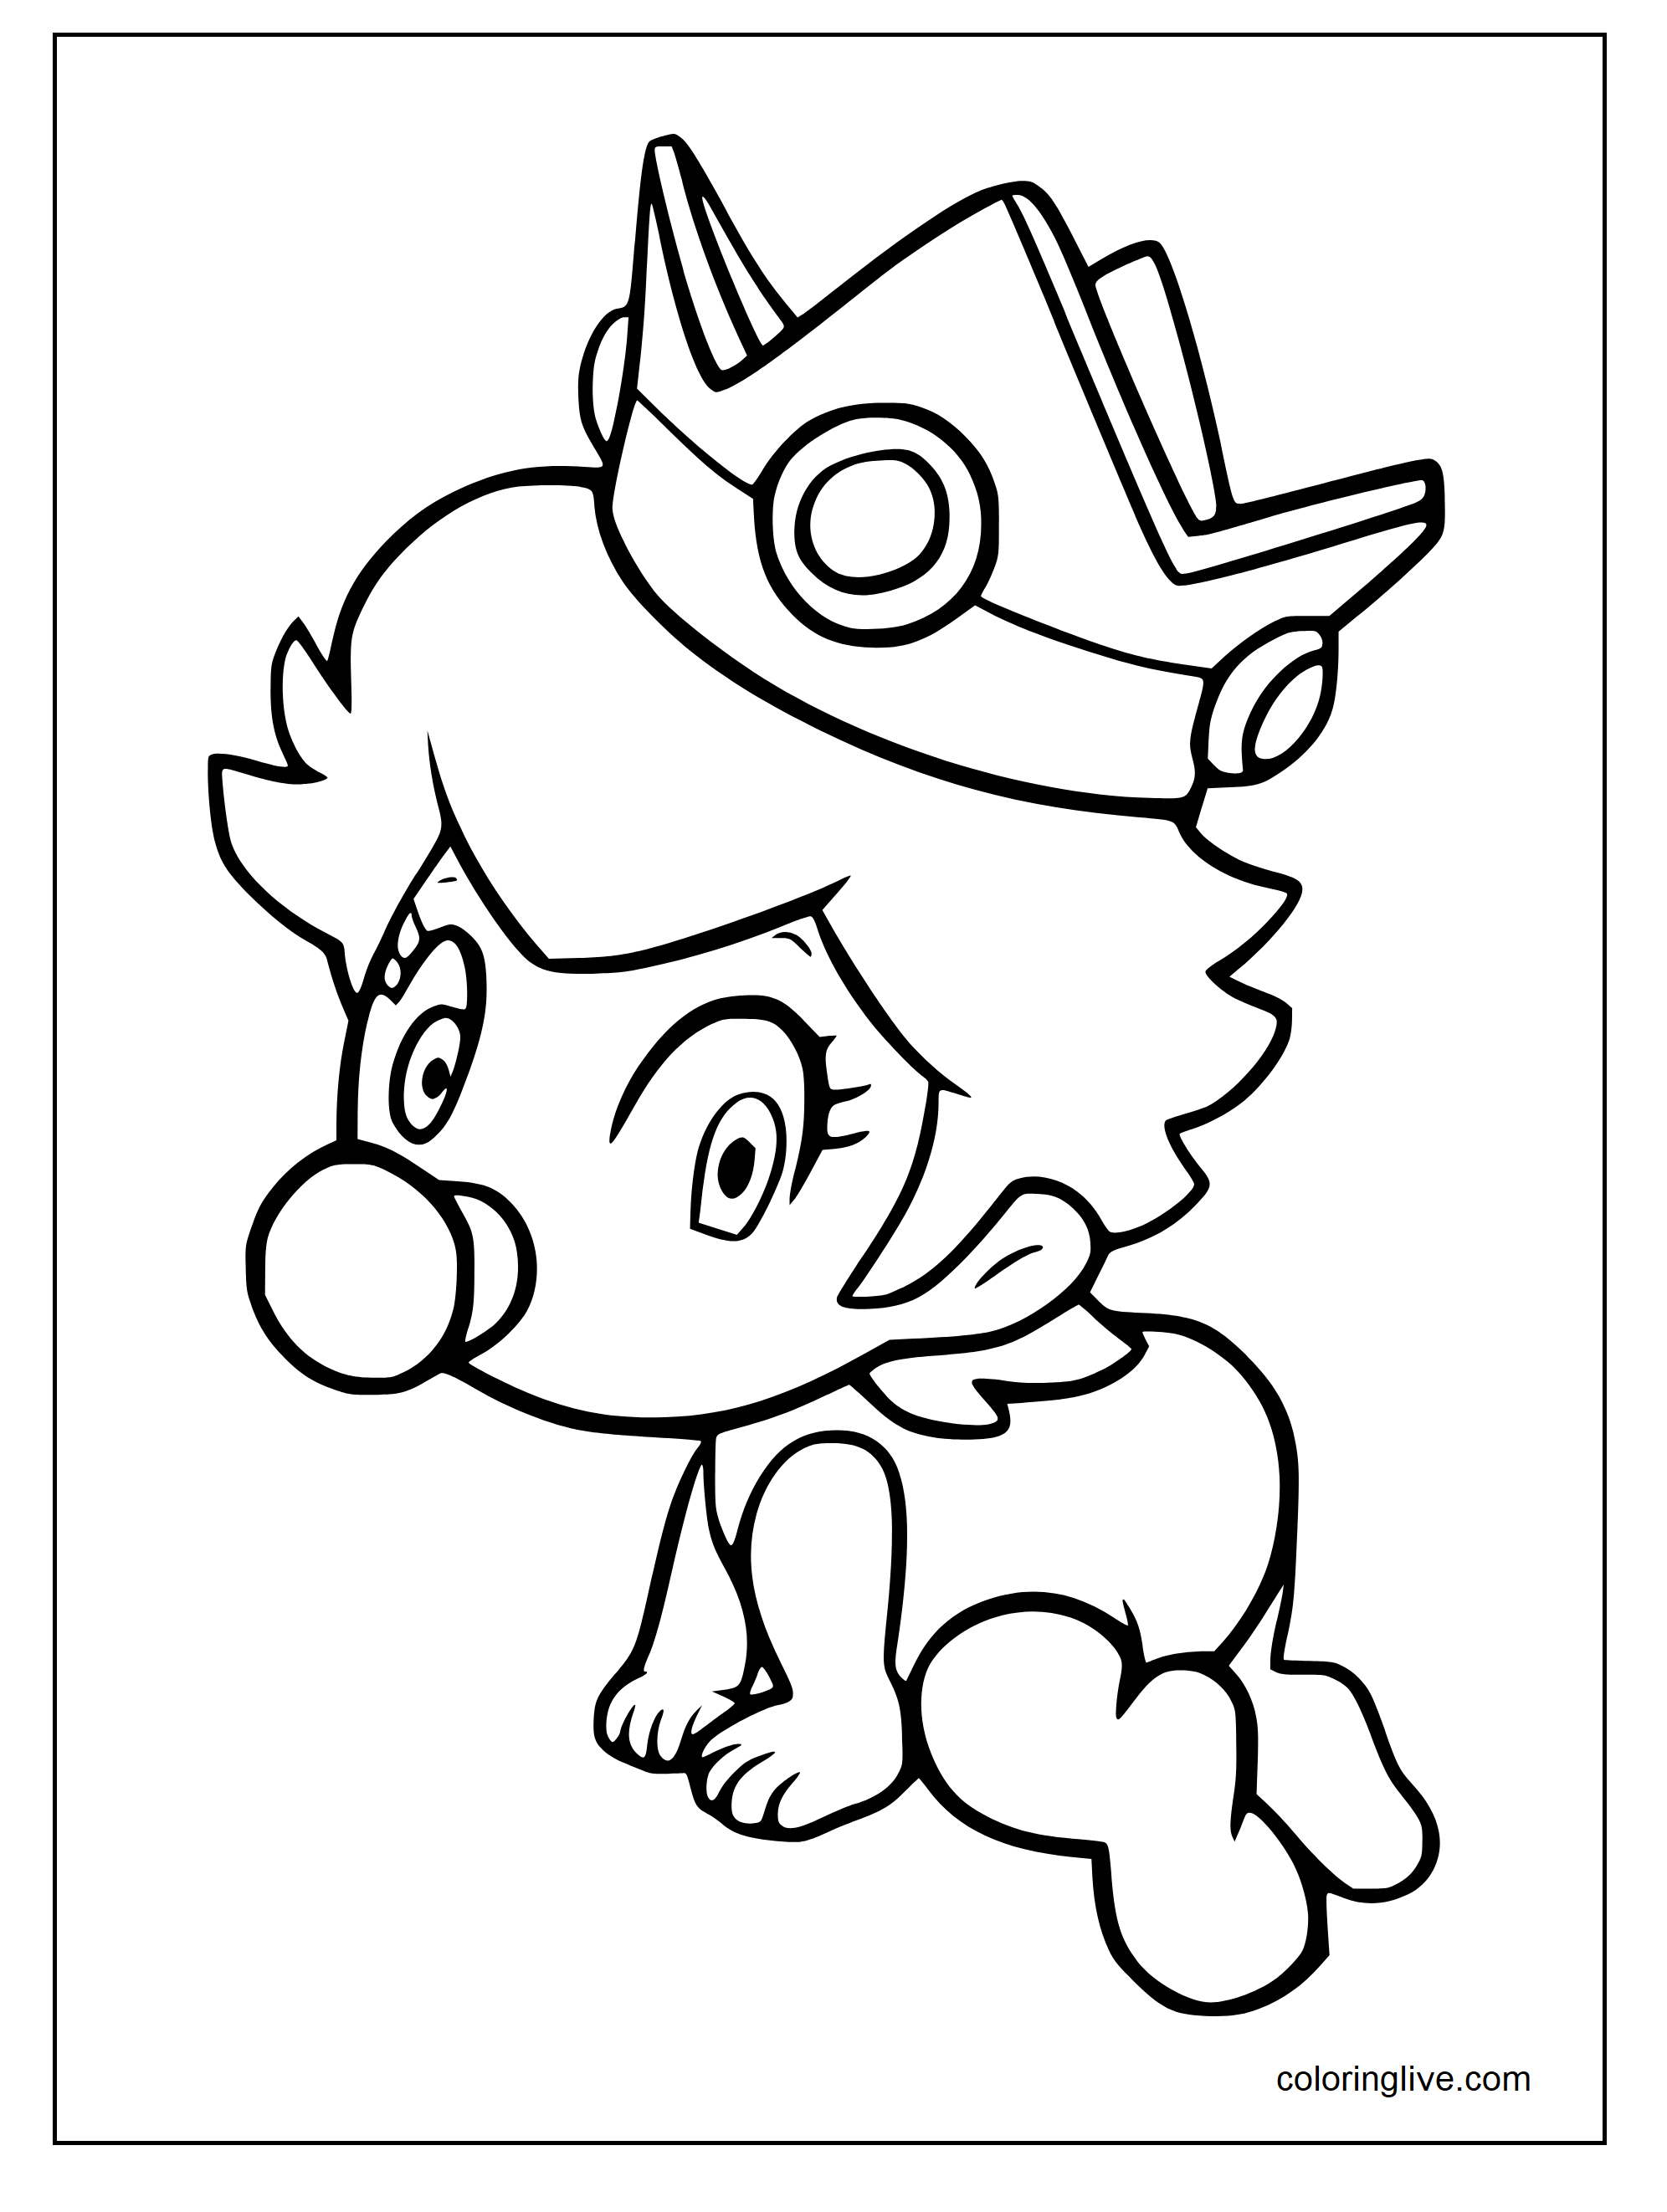 Printable Princess Peach as a Baby Coloring Page for kids.